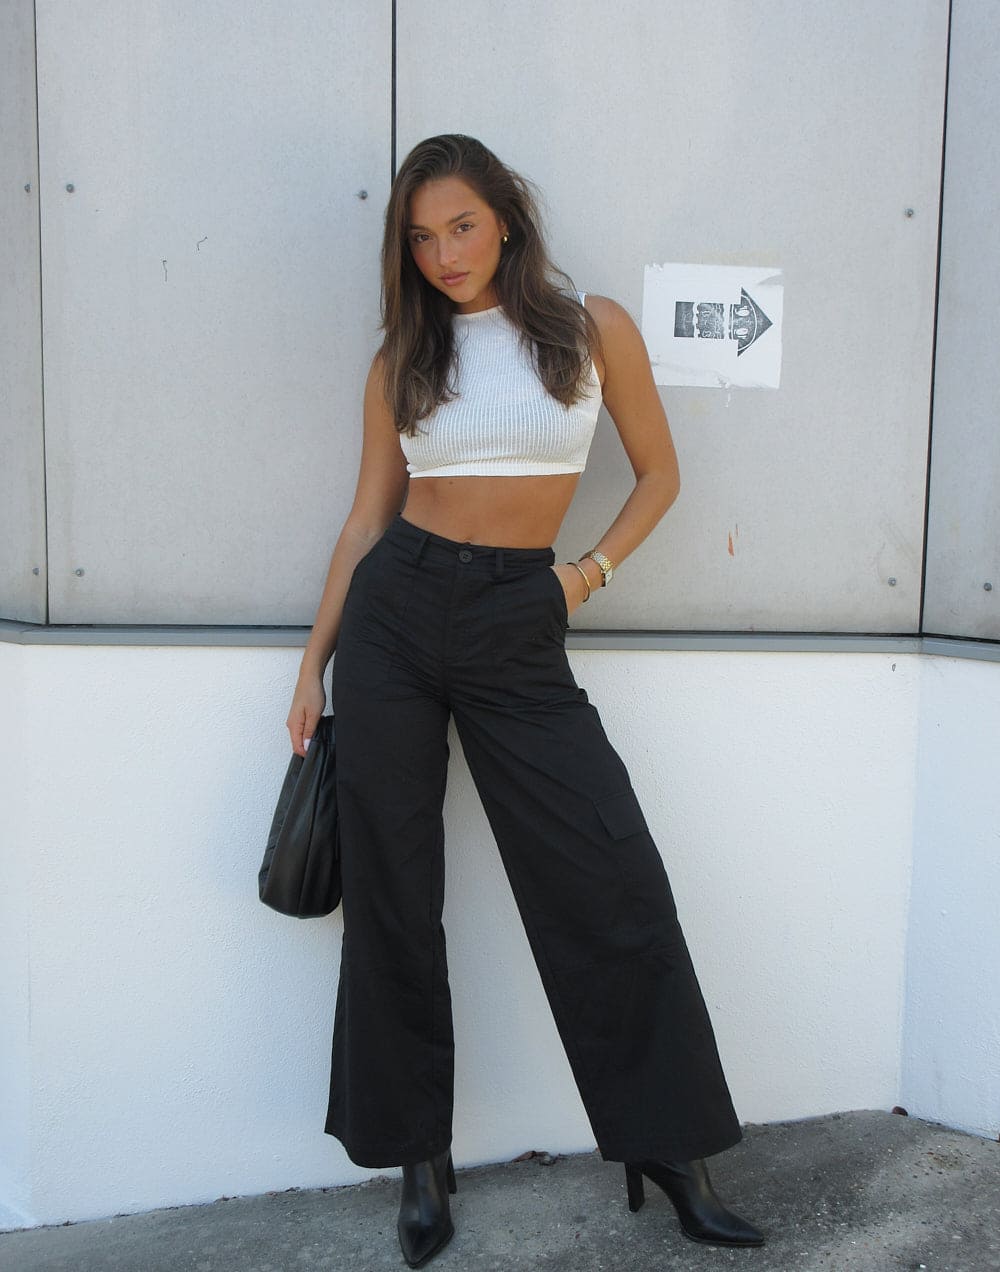 Spencer Cargo Pants (Black) - High Waisted Straight Wide Leg Cargo Pants - Women's Pants - Charcoal Clothing